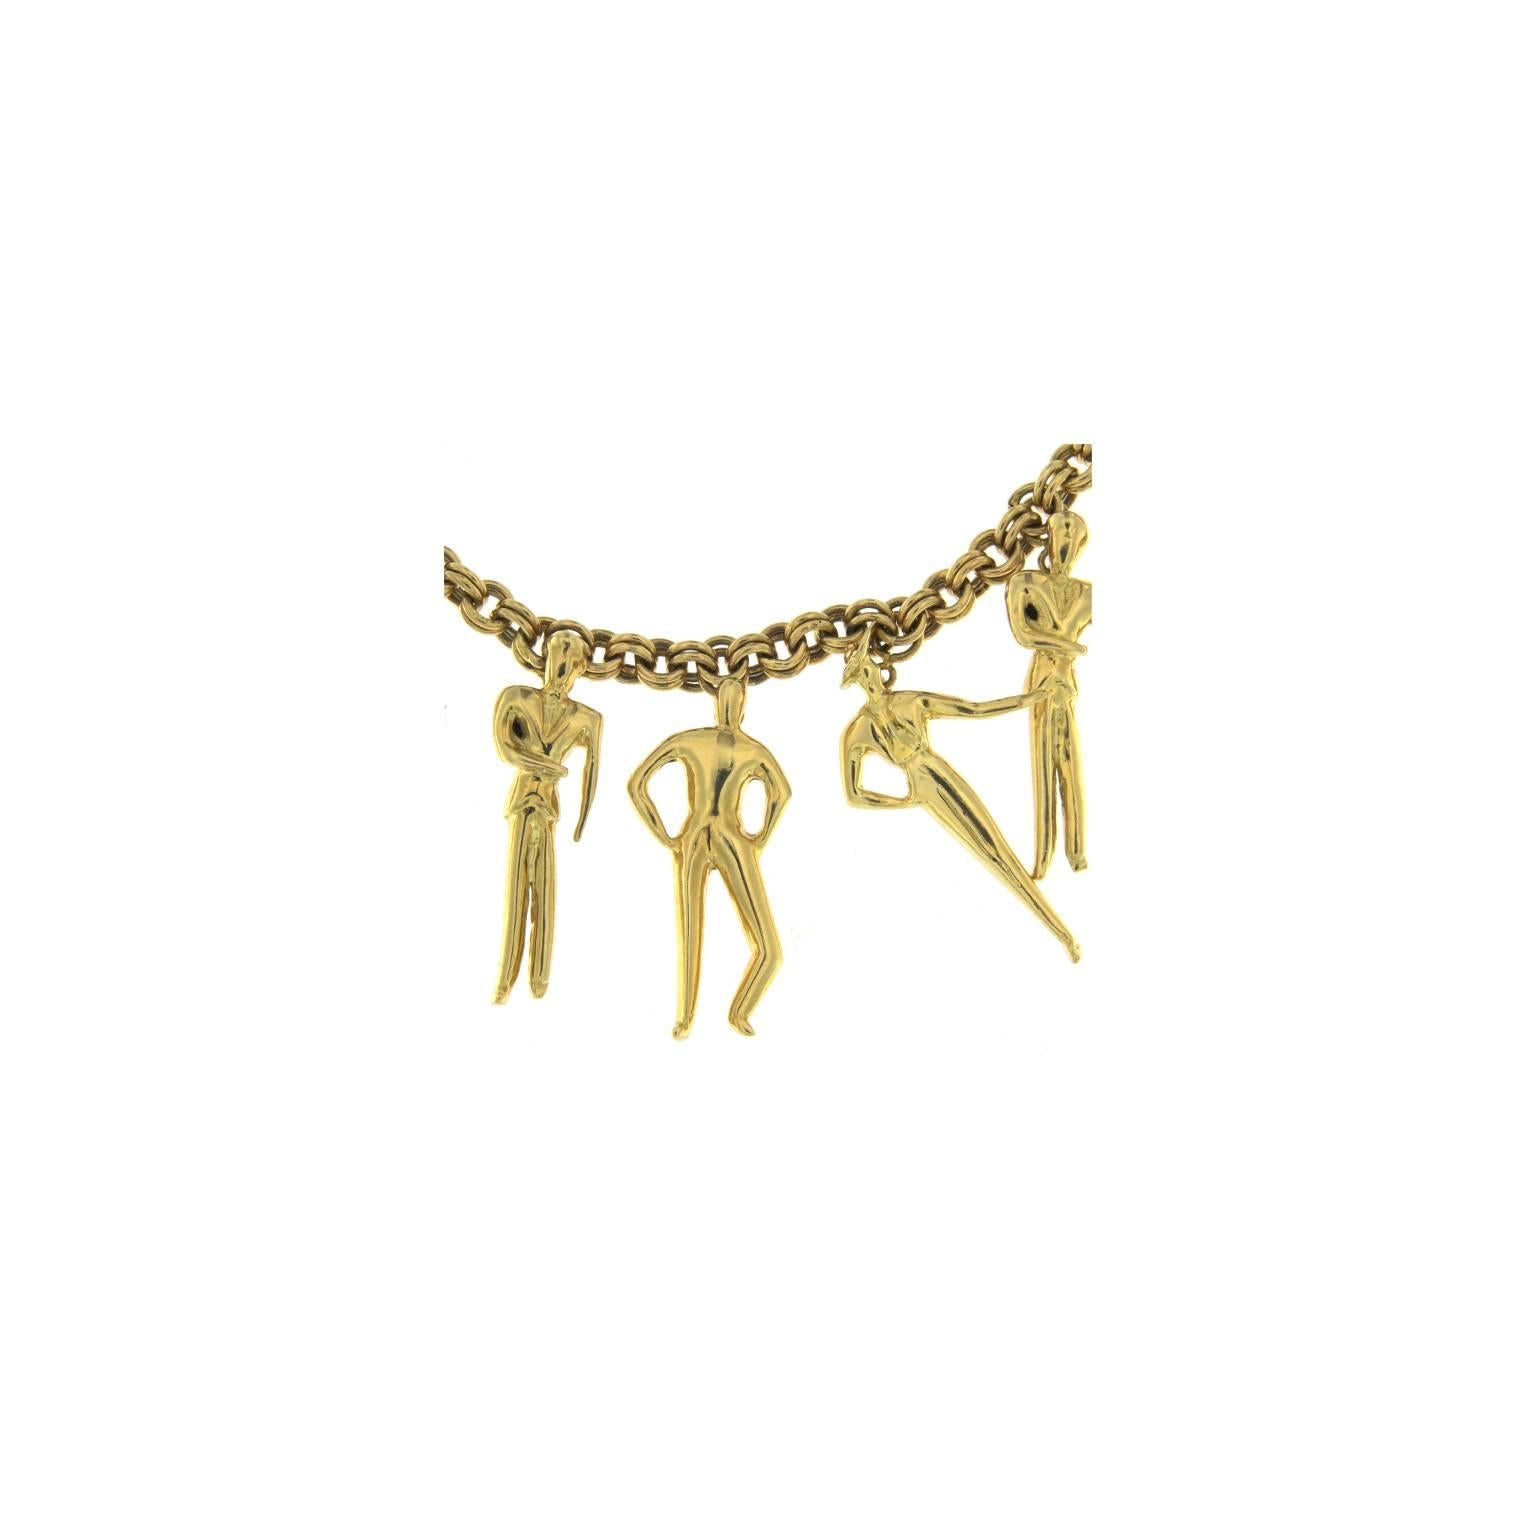 This necklace was inspired by the fashion week of Milan
It has 10 different model differently dressed all in yellow gold
The total weight of the gold is gr 108.10
Stamp 750 10MI
